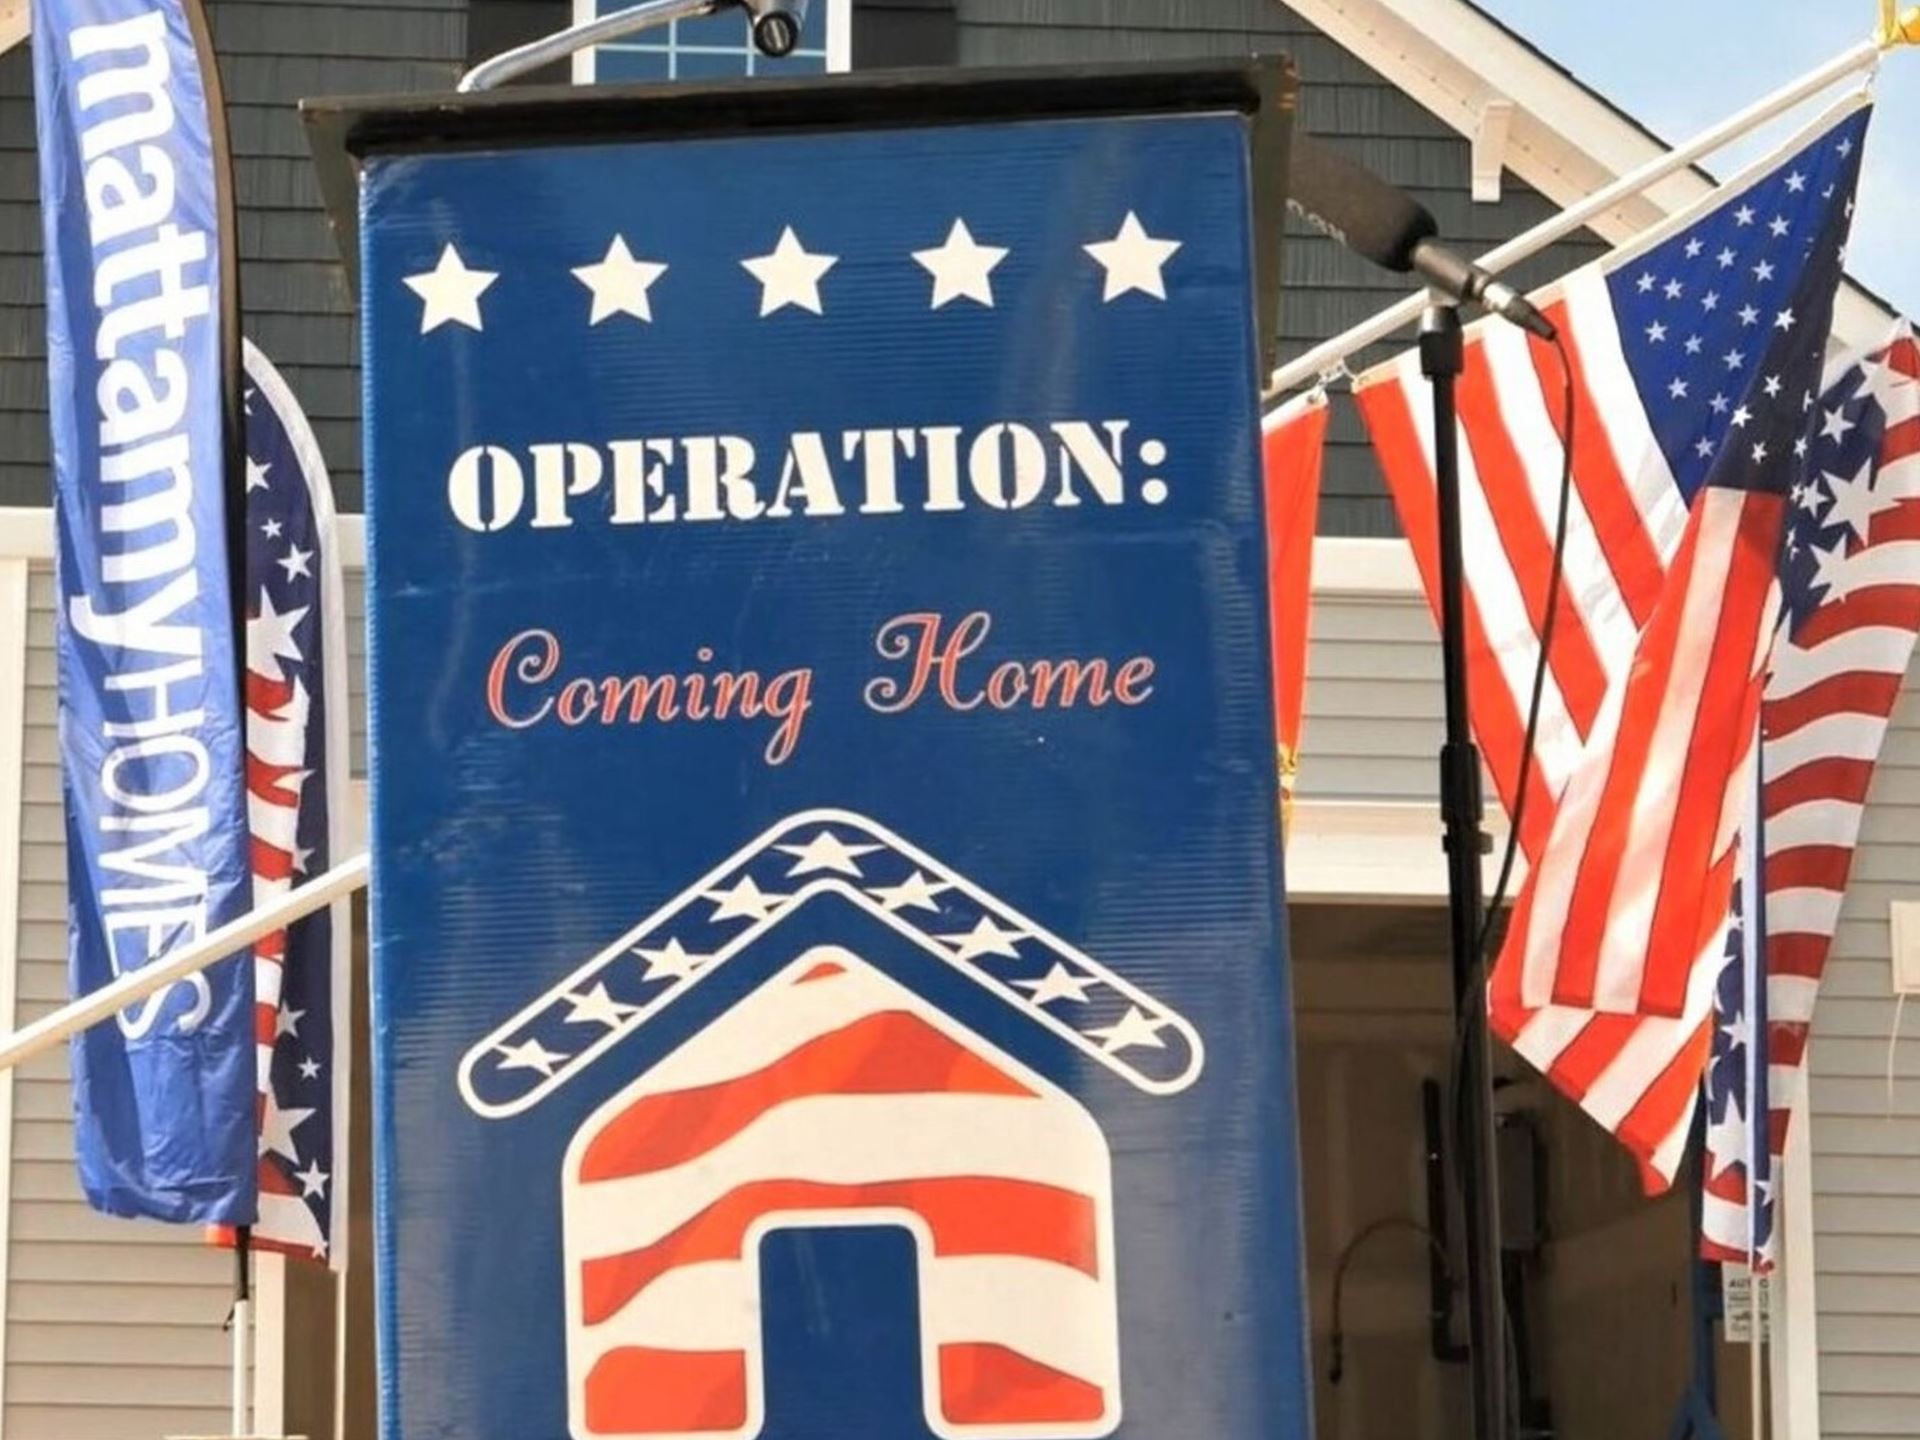 Operation coming home